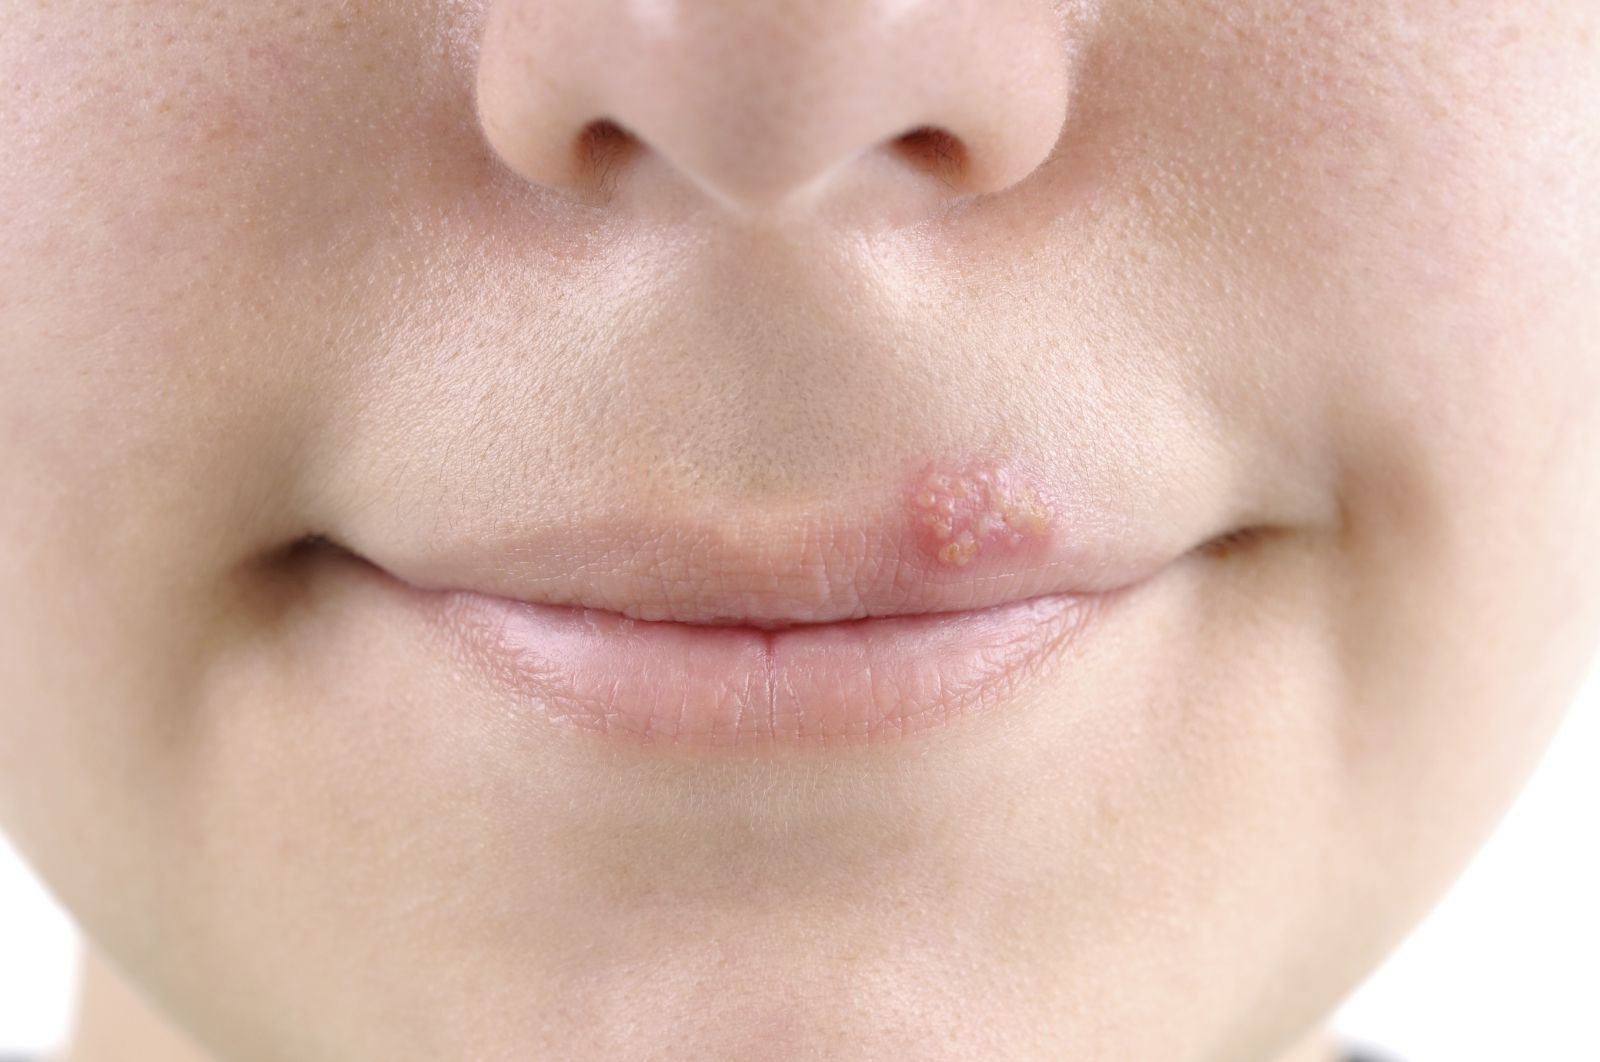 What is the best way to treat cold sores? This is what physicians advise